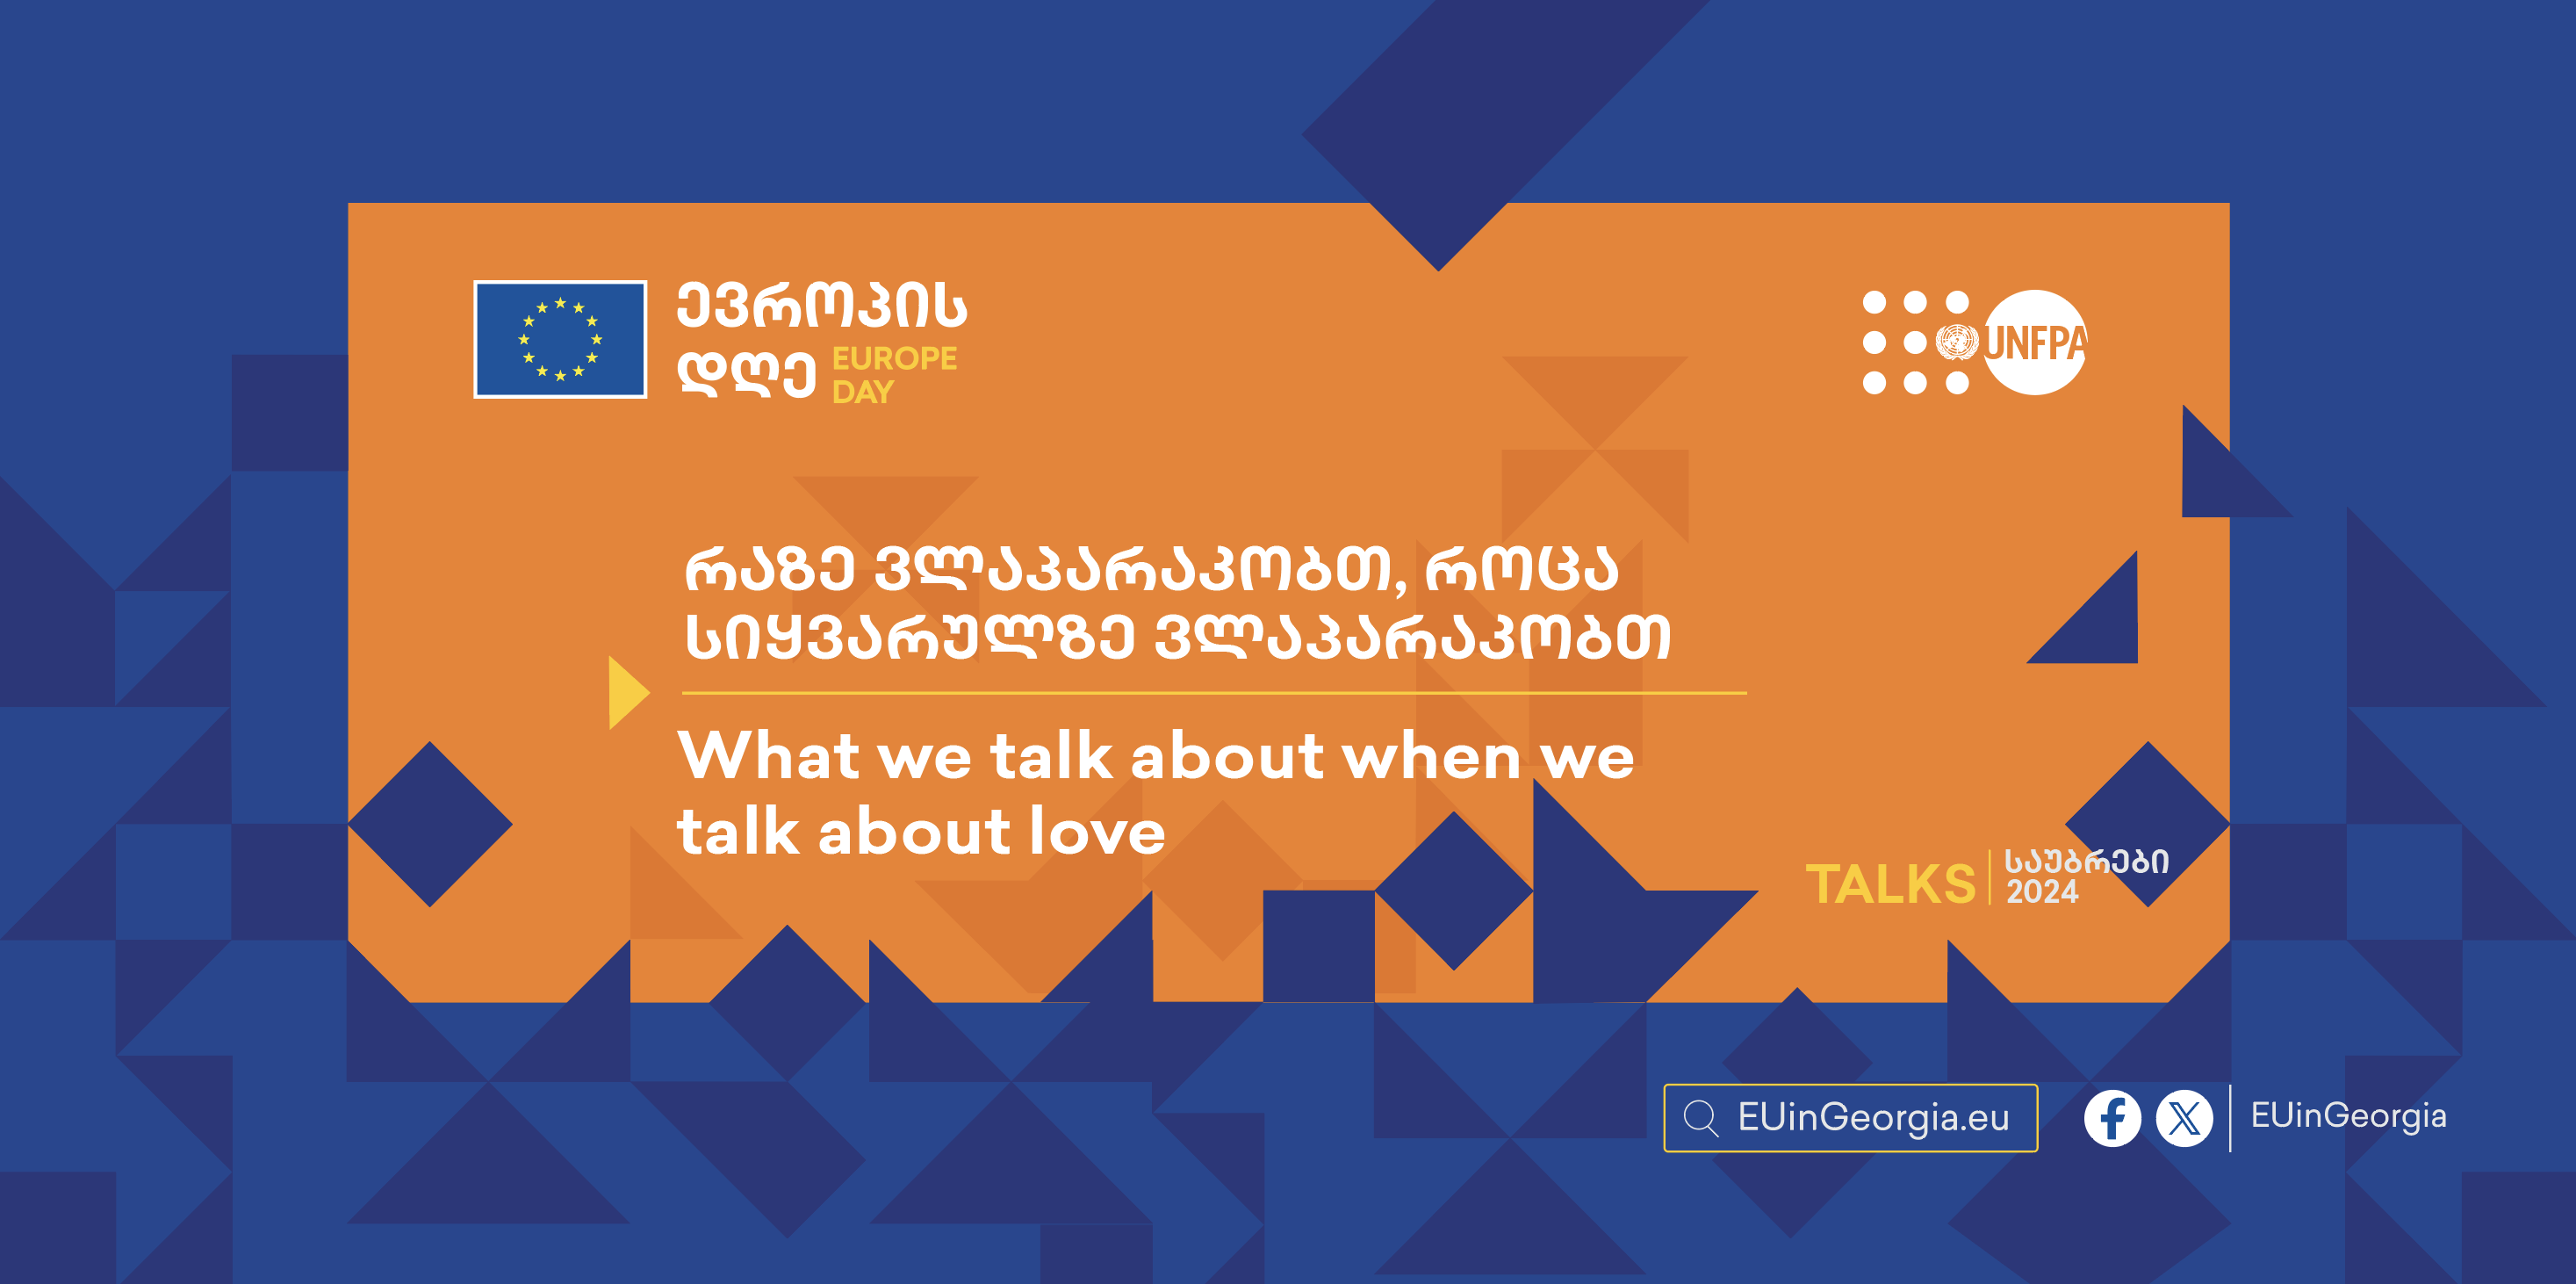 A poster announcing a talk called What we talk about when we talk about love led by UNFPA Georgia